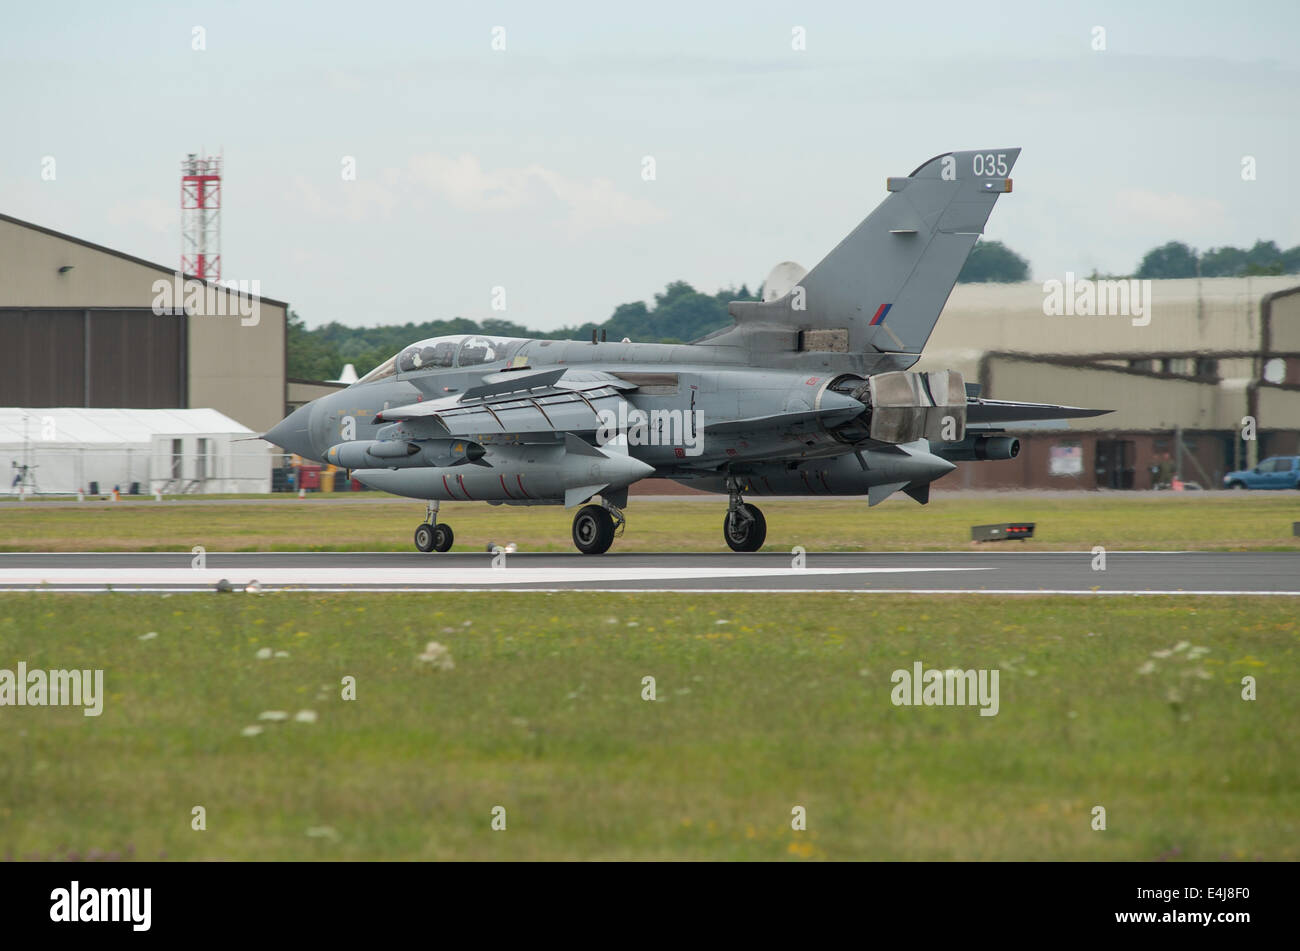 RAF Fairford, Gloucestershire UK. 11th July 2014. Fast jets on display at the first day of RIAT. RAF Panavia Tornado GR4 035 landing with reverse thrusters deployed. Credit:  Malcolm Park editorial/Alamy Live News Stock Photo